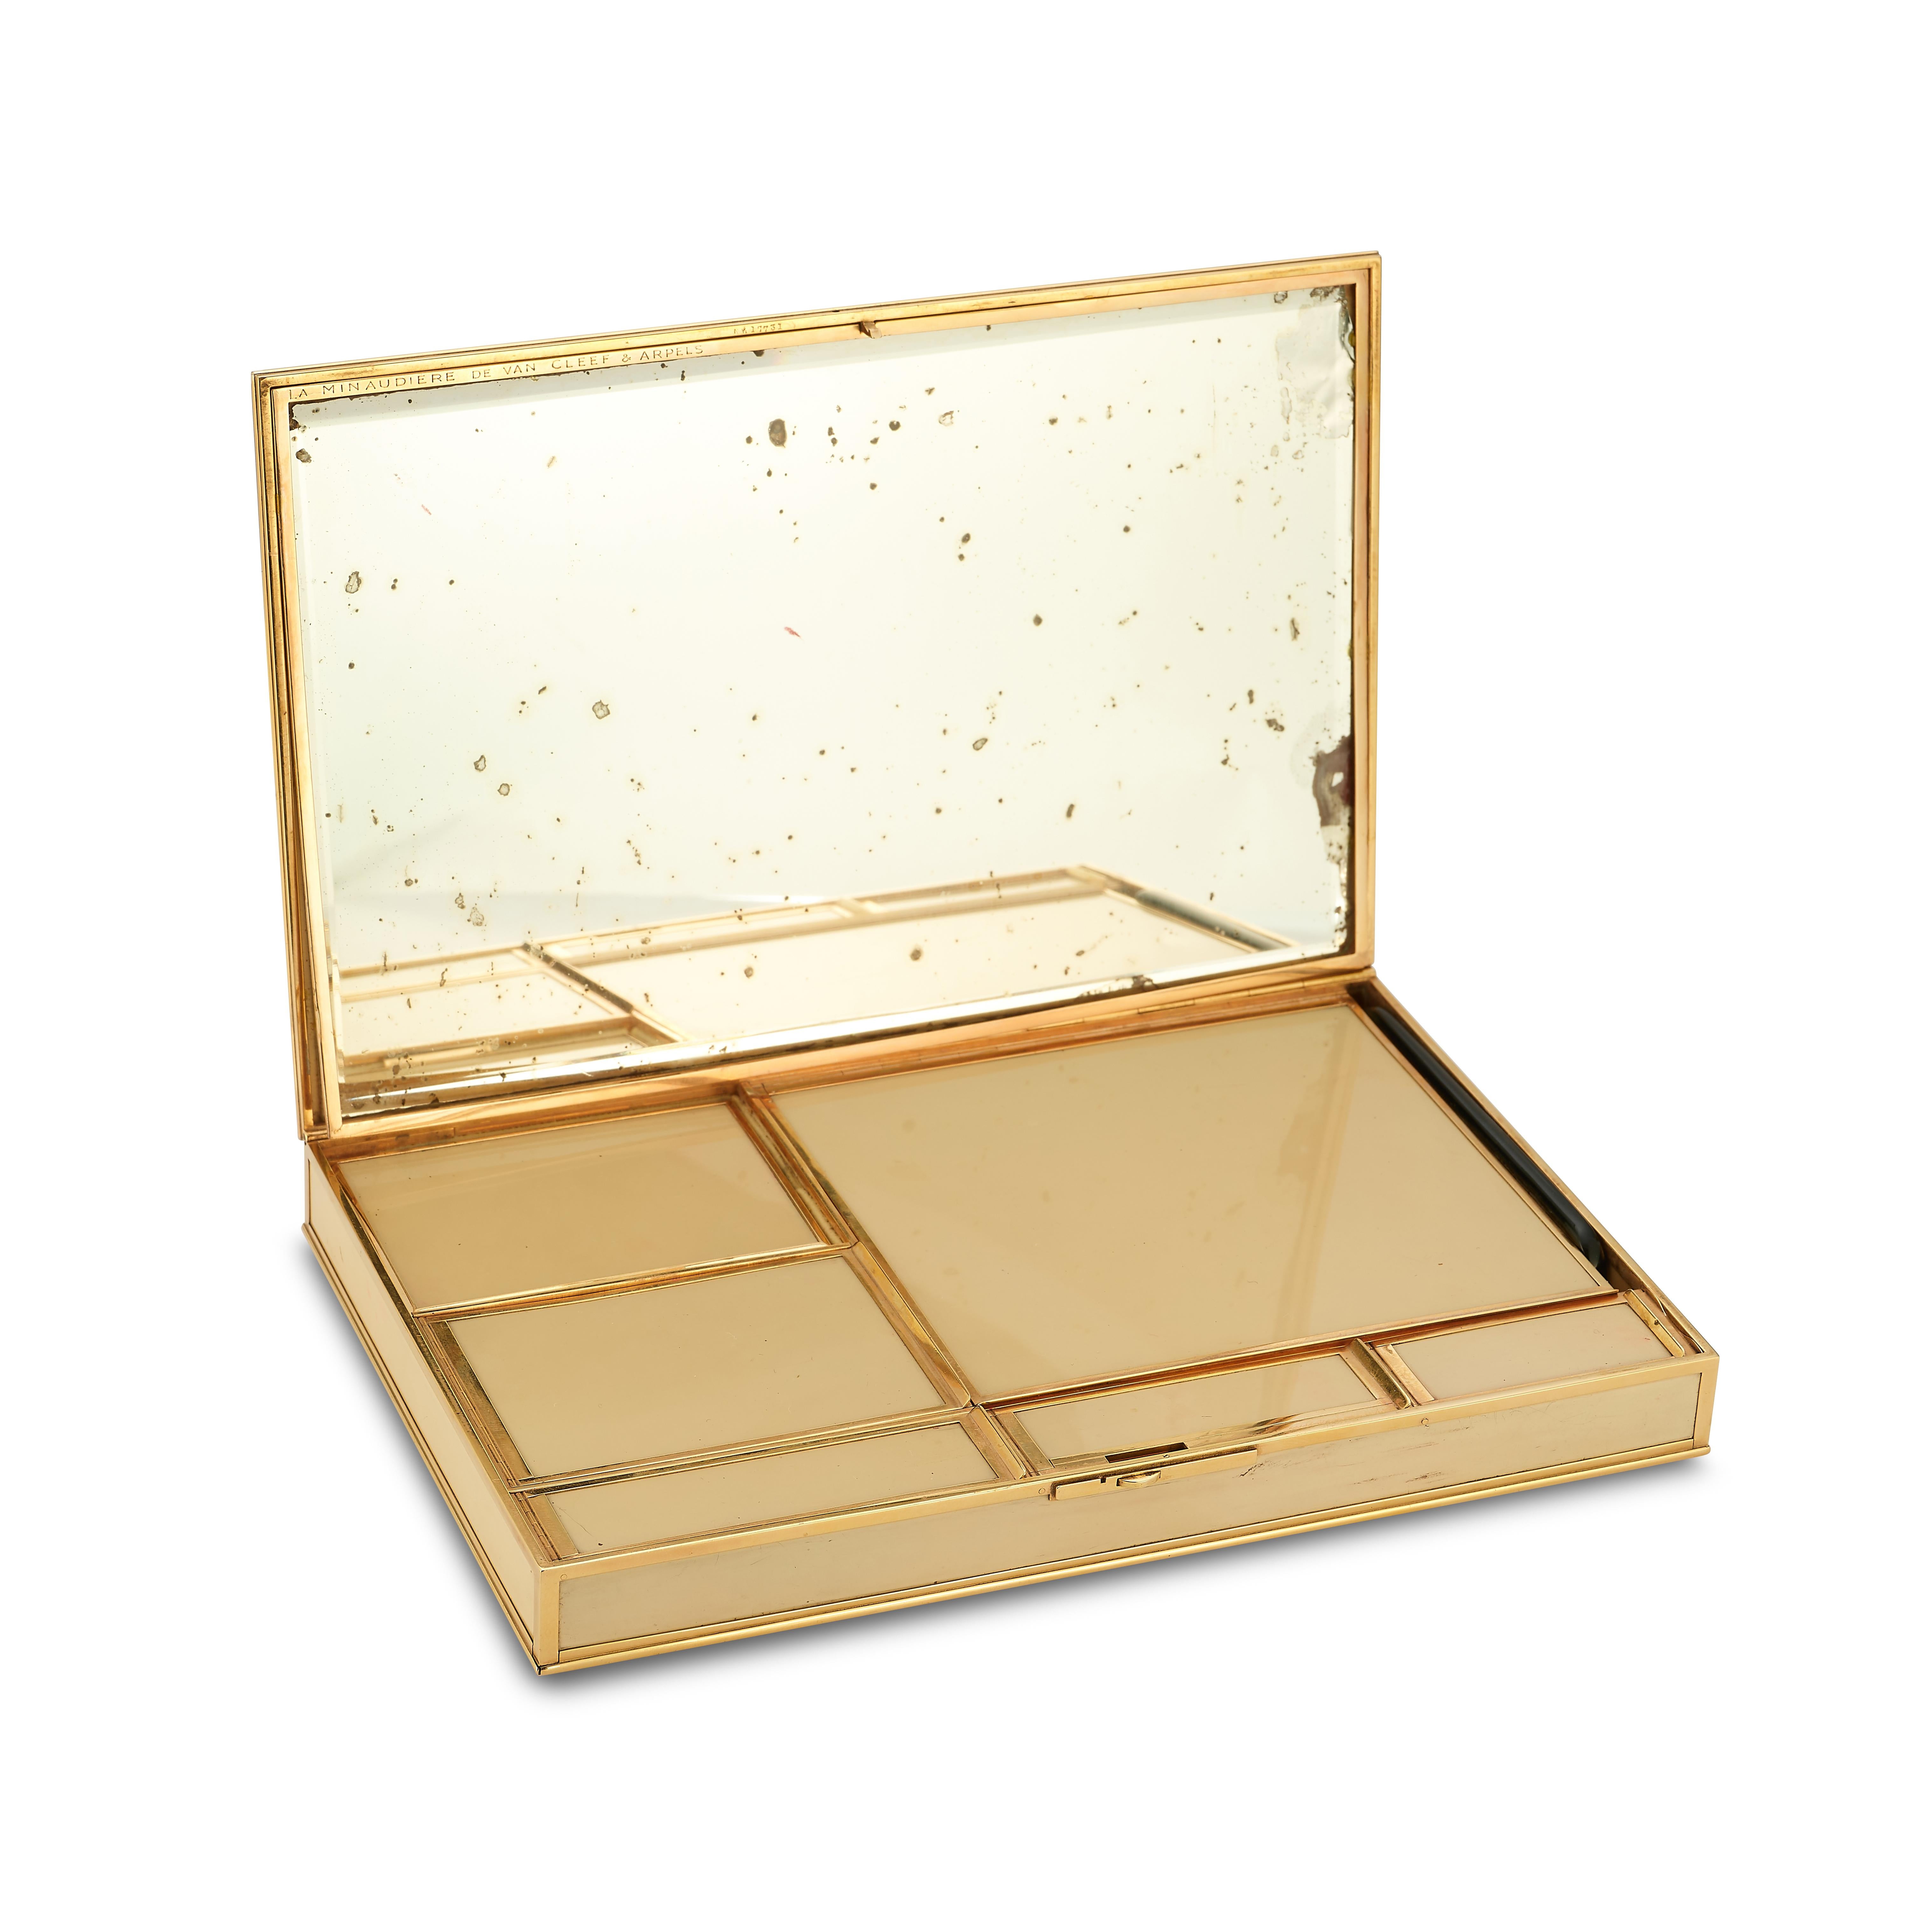 Van Cleef & Arpels Sapphire Gold Diamond and Bakelite Minaudière Makeup Box

Made of Bakelite and 18 karat yellow gold, set with 31 cabochon sapphires and 13 square cut diamonds. The inside contains several different sized compartments, a compact